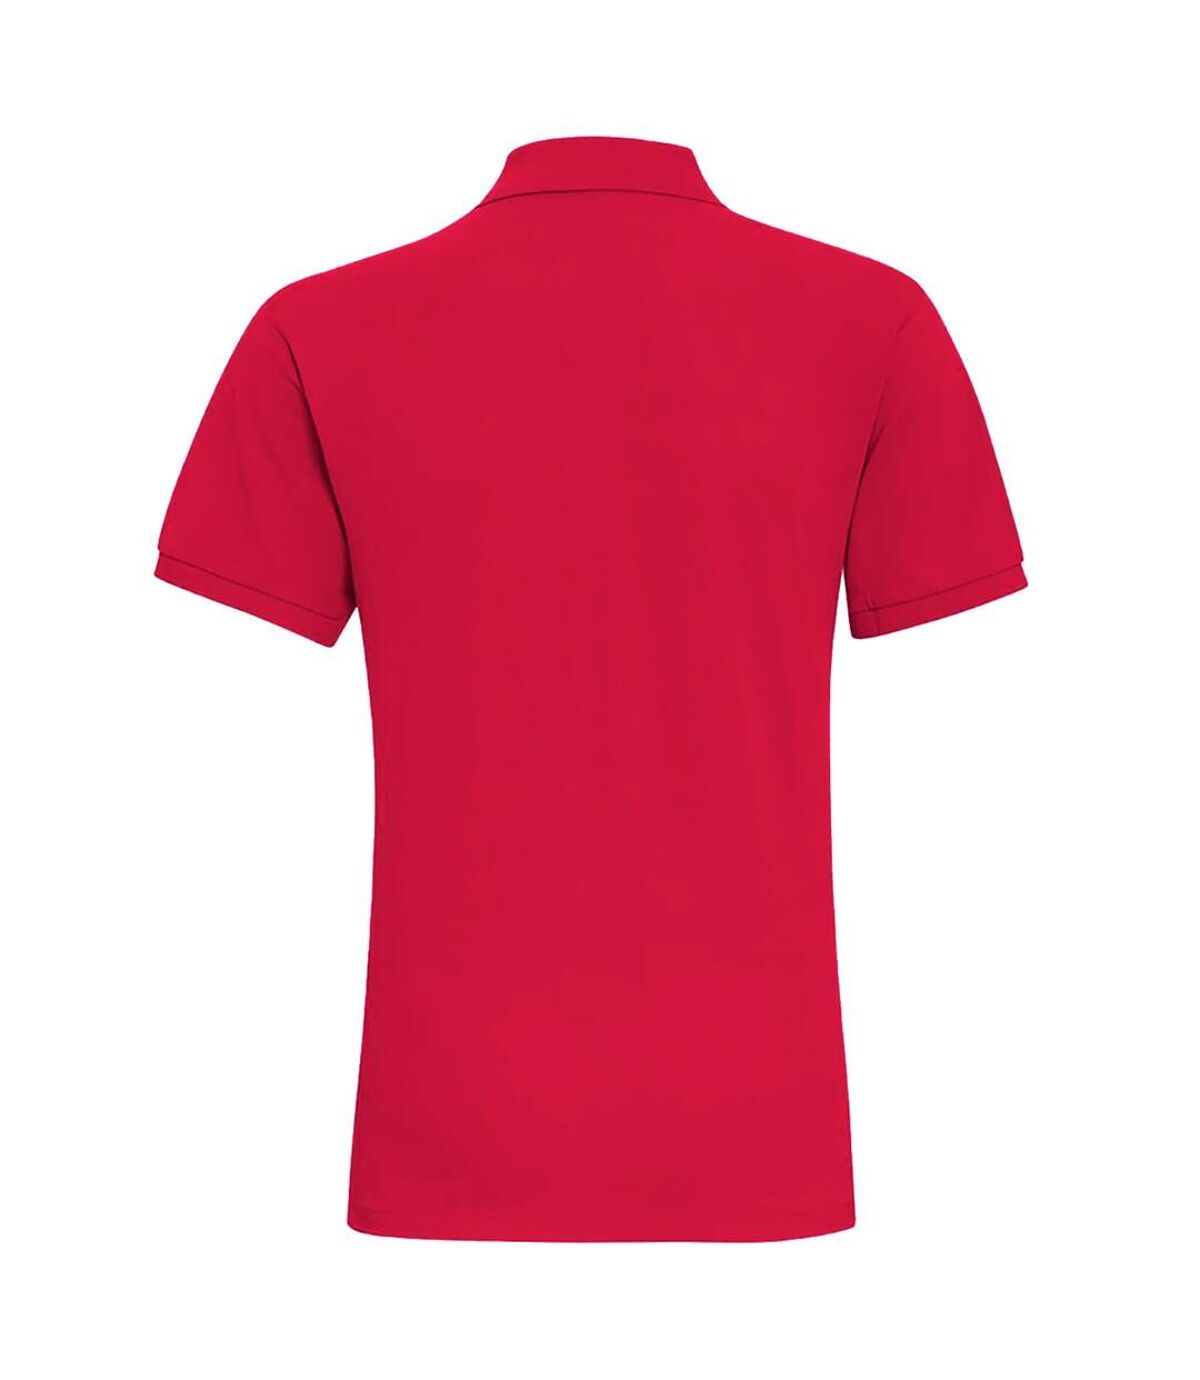 Asquith & Fox - Polo manches courtes - Homme (Rouge vif) - UTRW3471